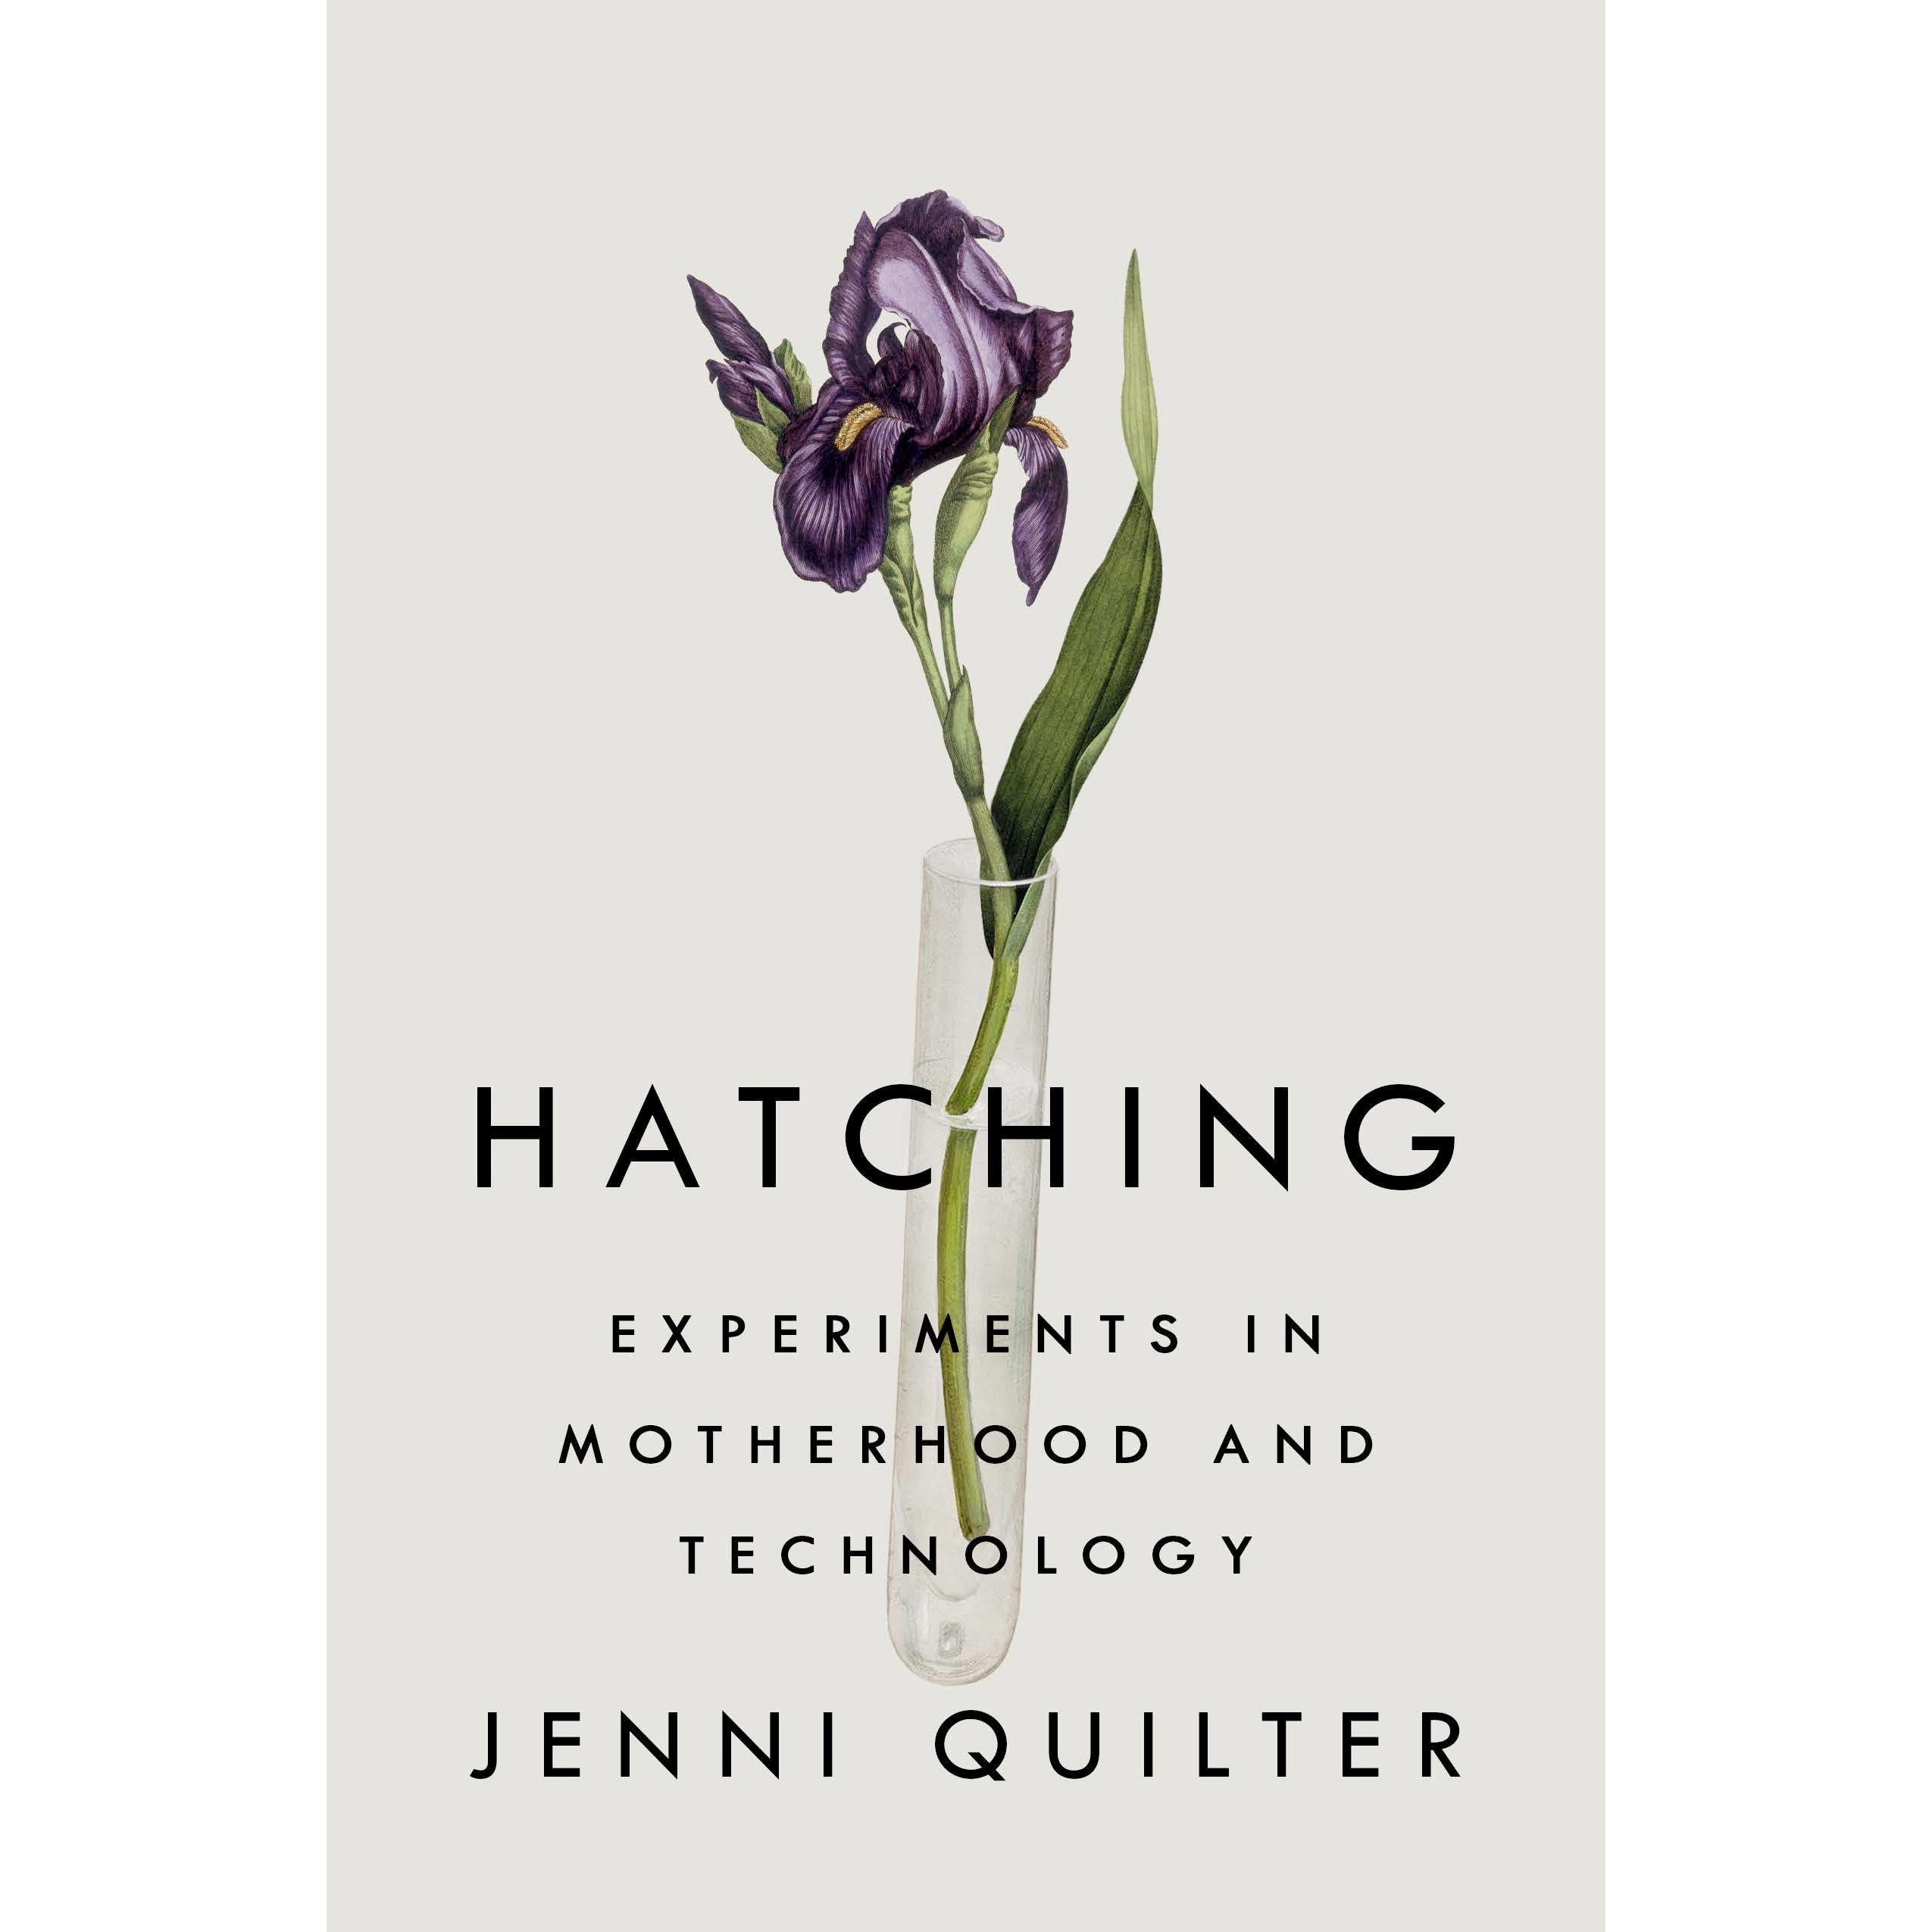 The cover of Hatching: Experiments in Motherhood and Technology, by Jenni Quilter, shows a flower in a bud vase.